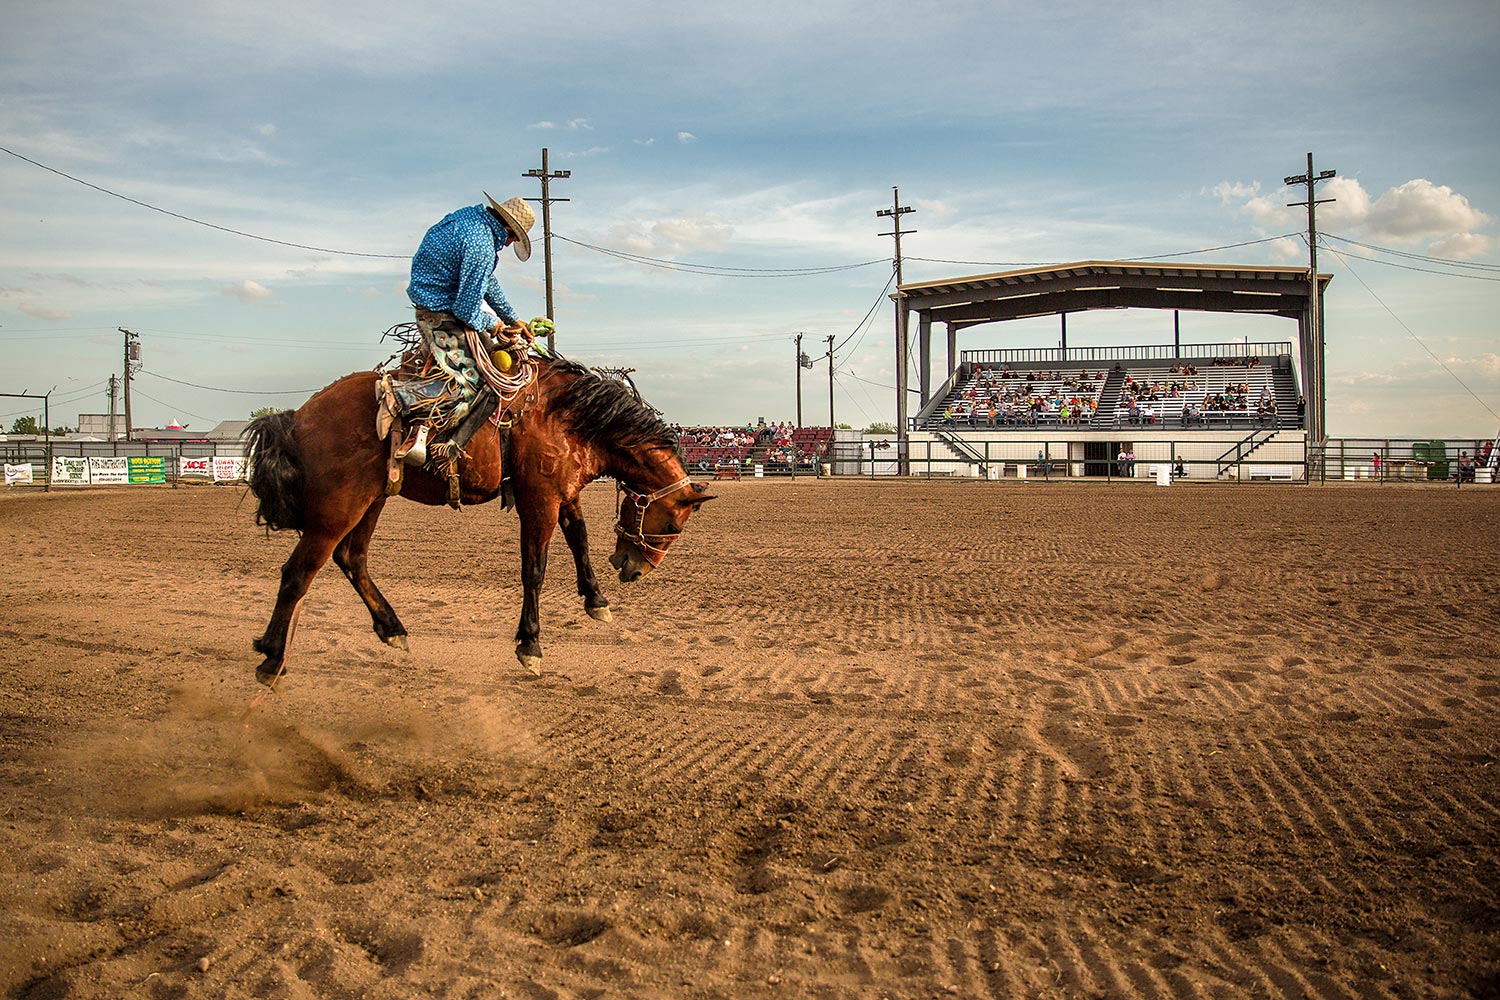 A horse tries bucking off its rider in a rodeo at the Blaine County Fair in Chinook, Montana.&nbsp;→ Buy a Print